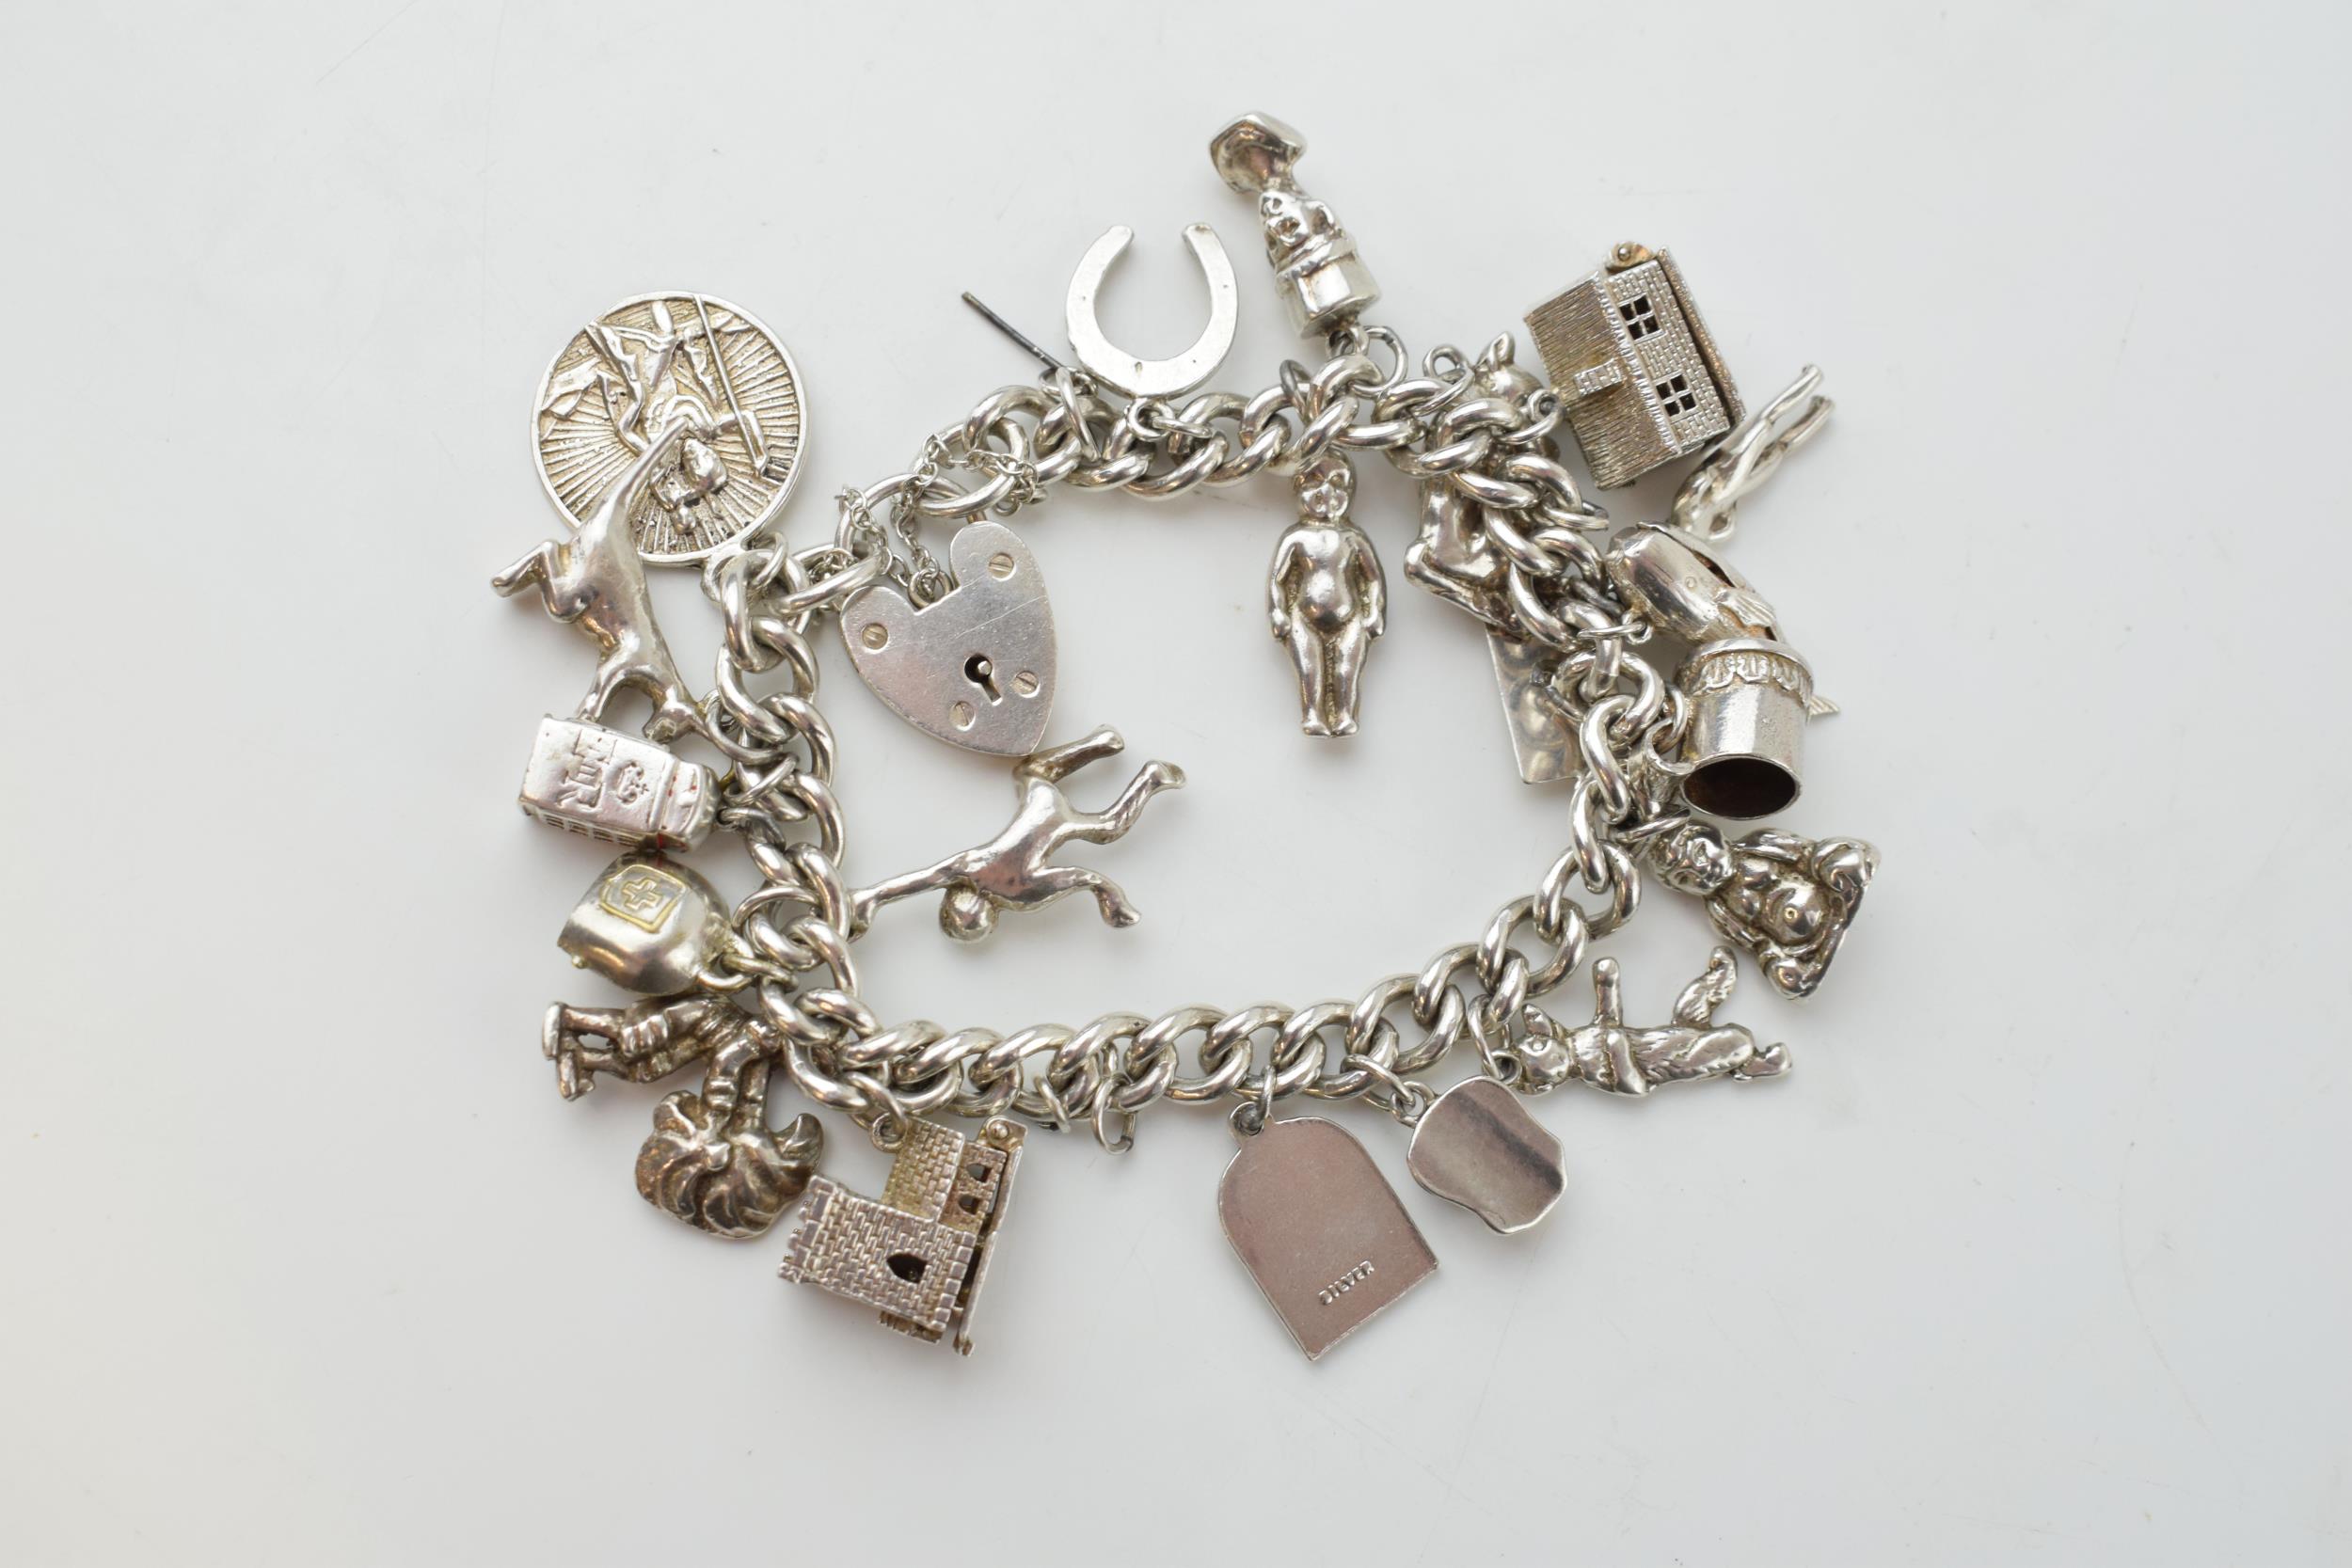 Silver charm bracelet with a church, a bear, people, a tankard and others, 81.6 grams. - Image 4 of 4